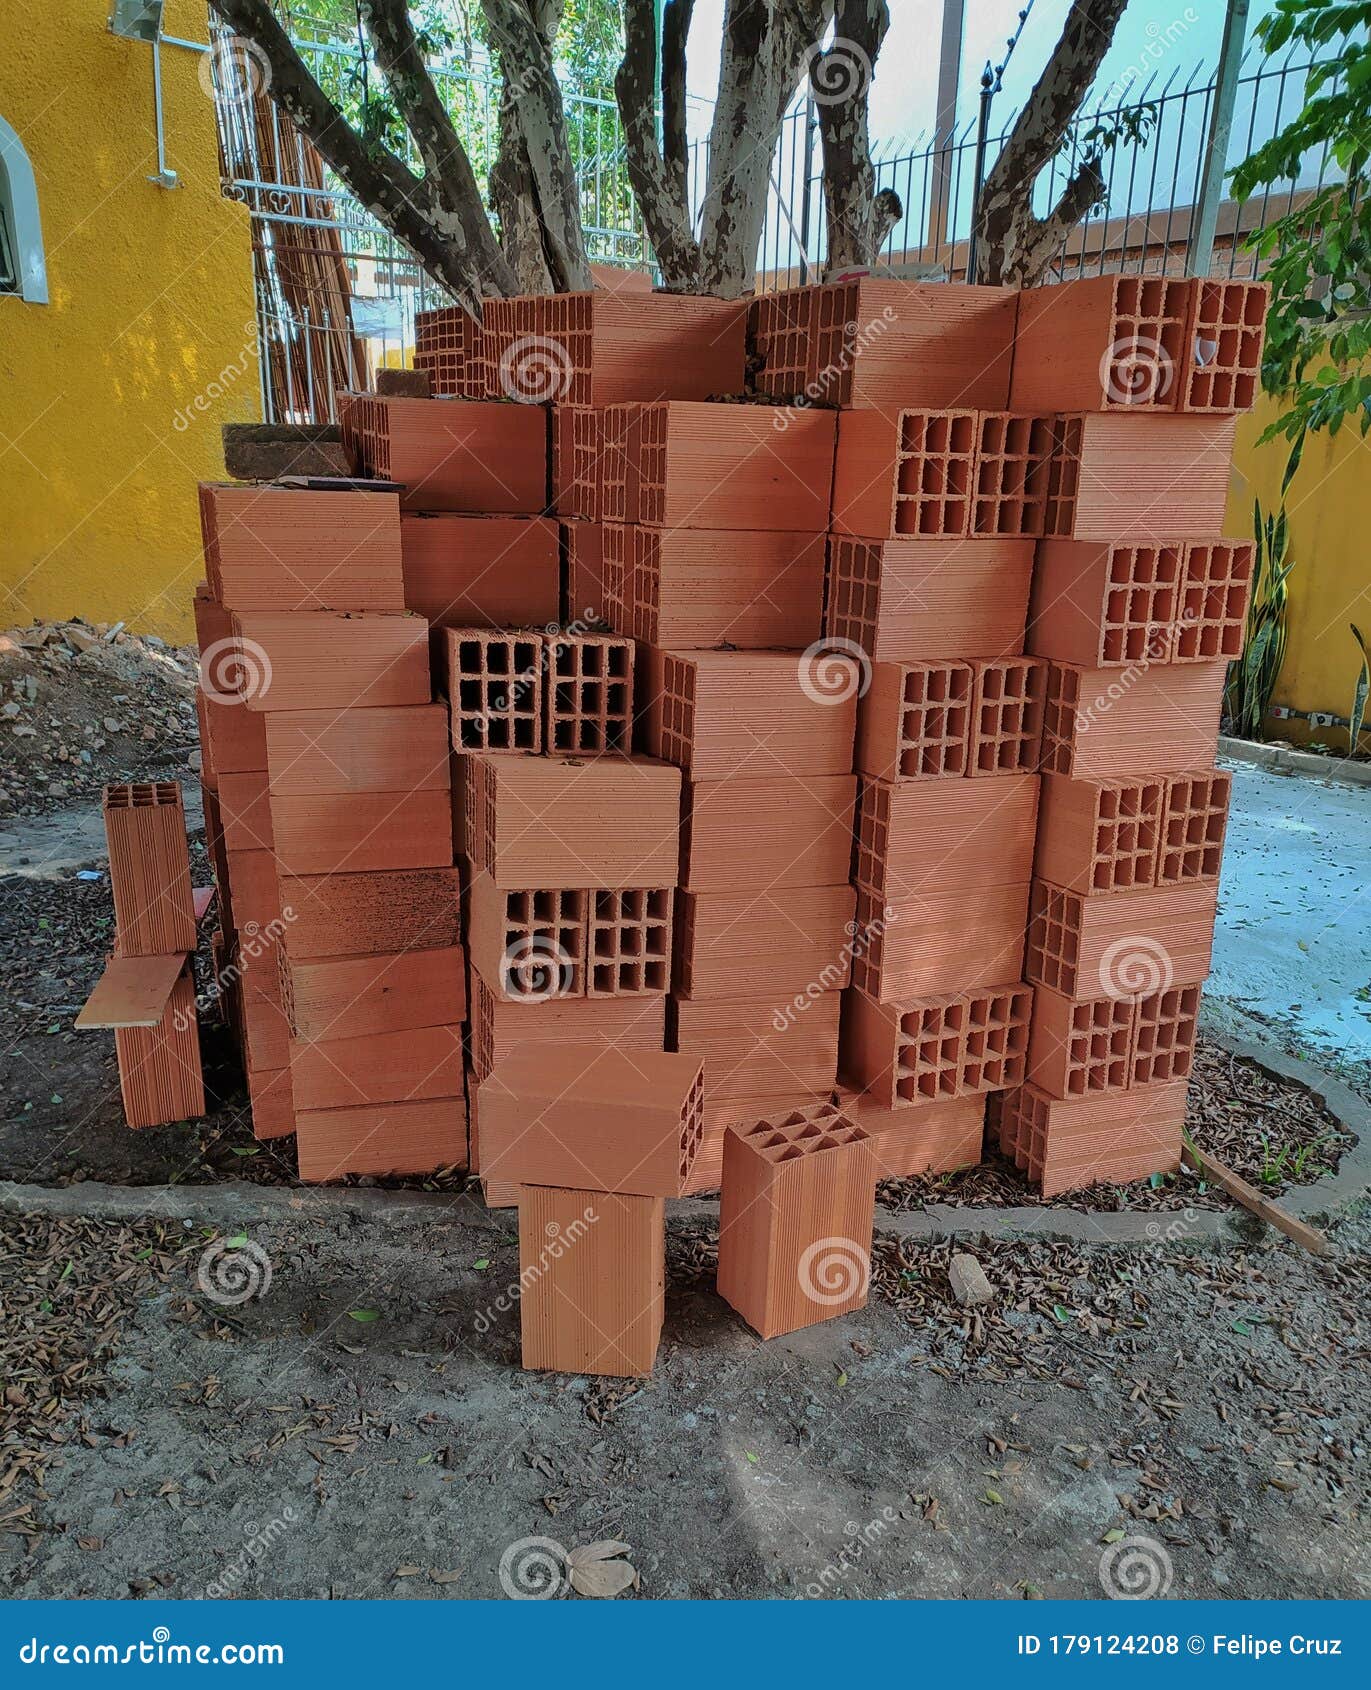 brick blocks piled up over one another in a construction site.